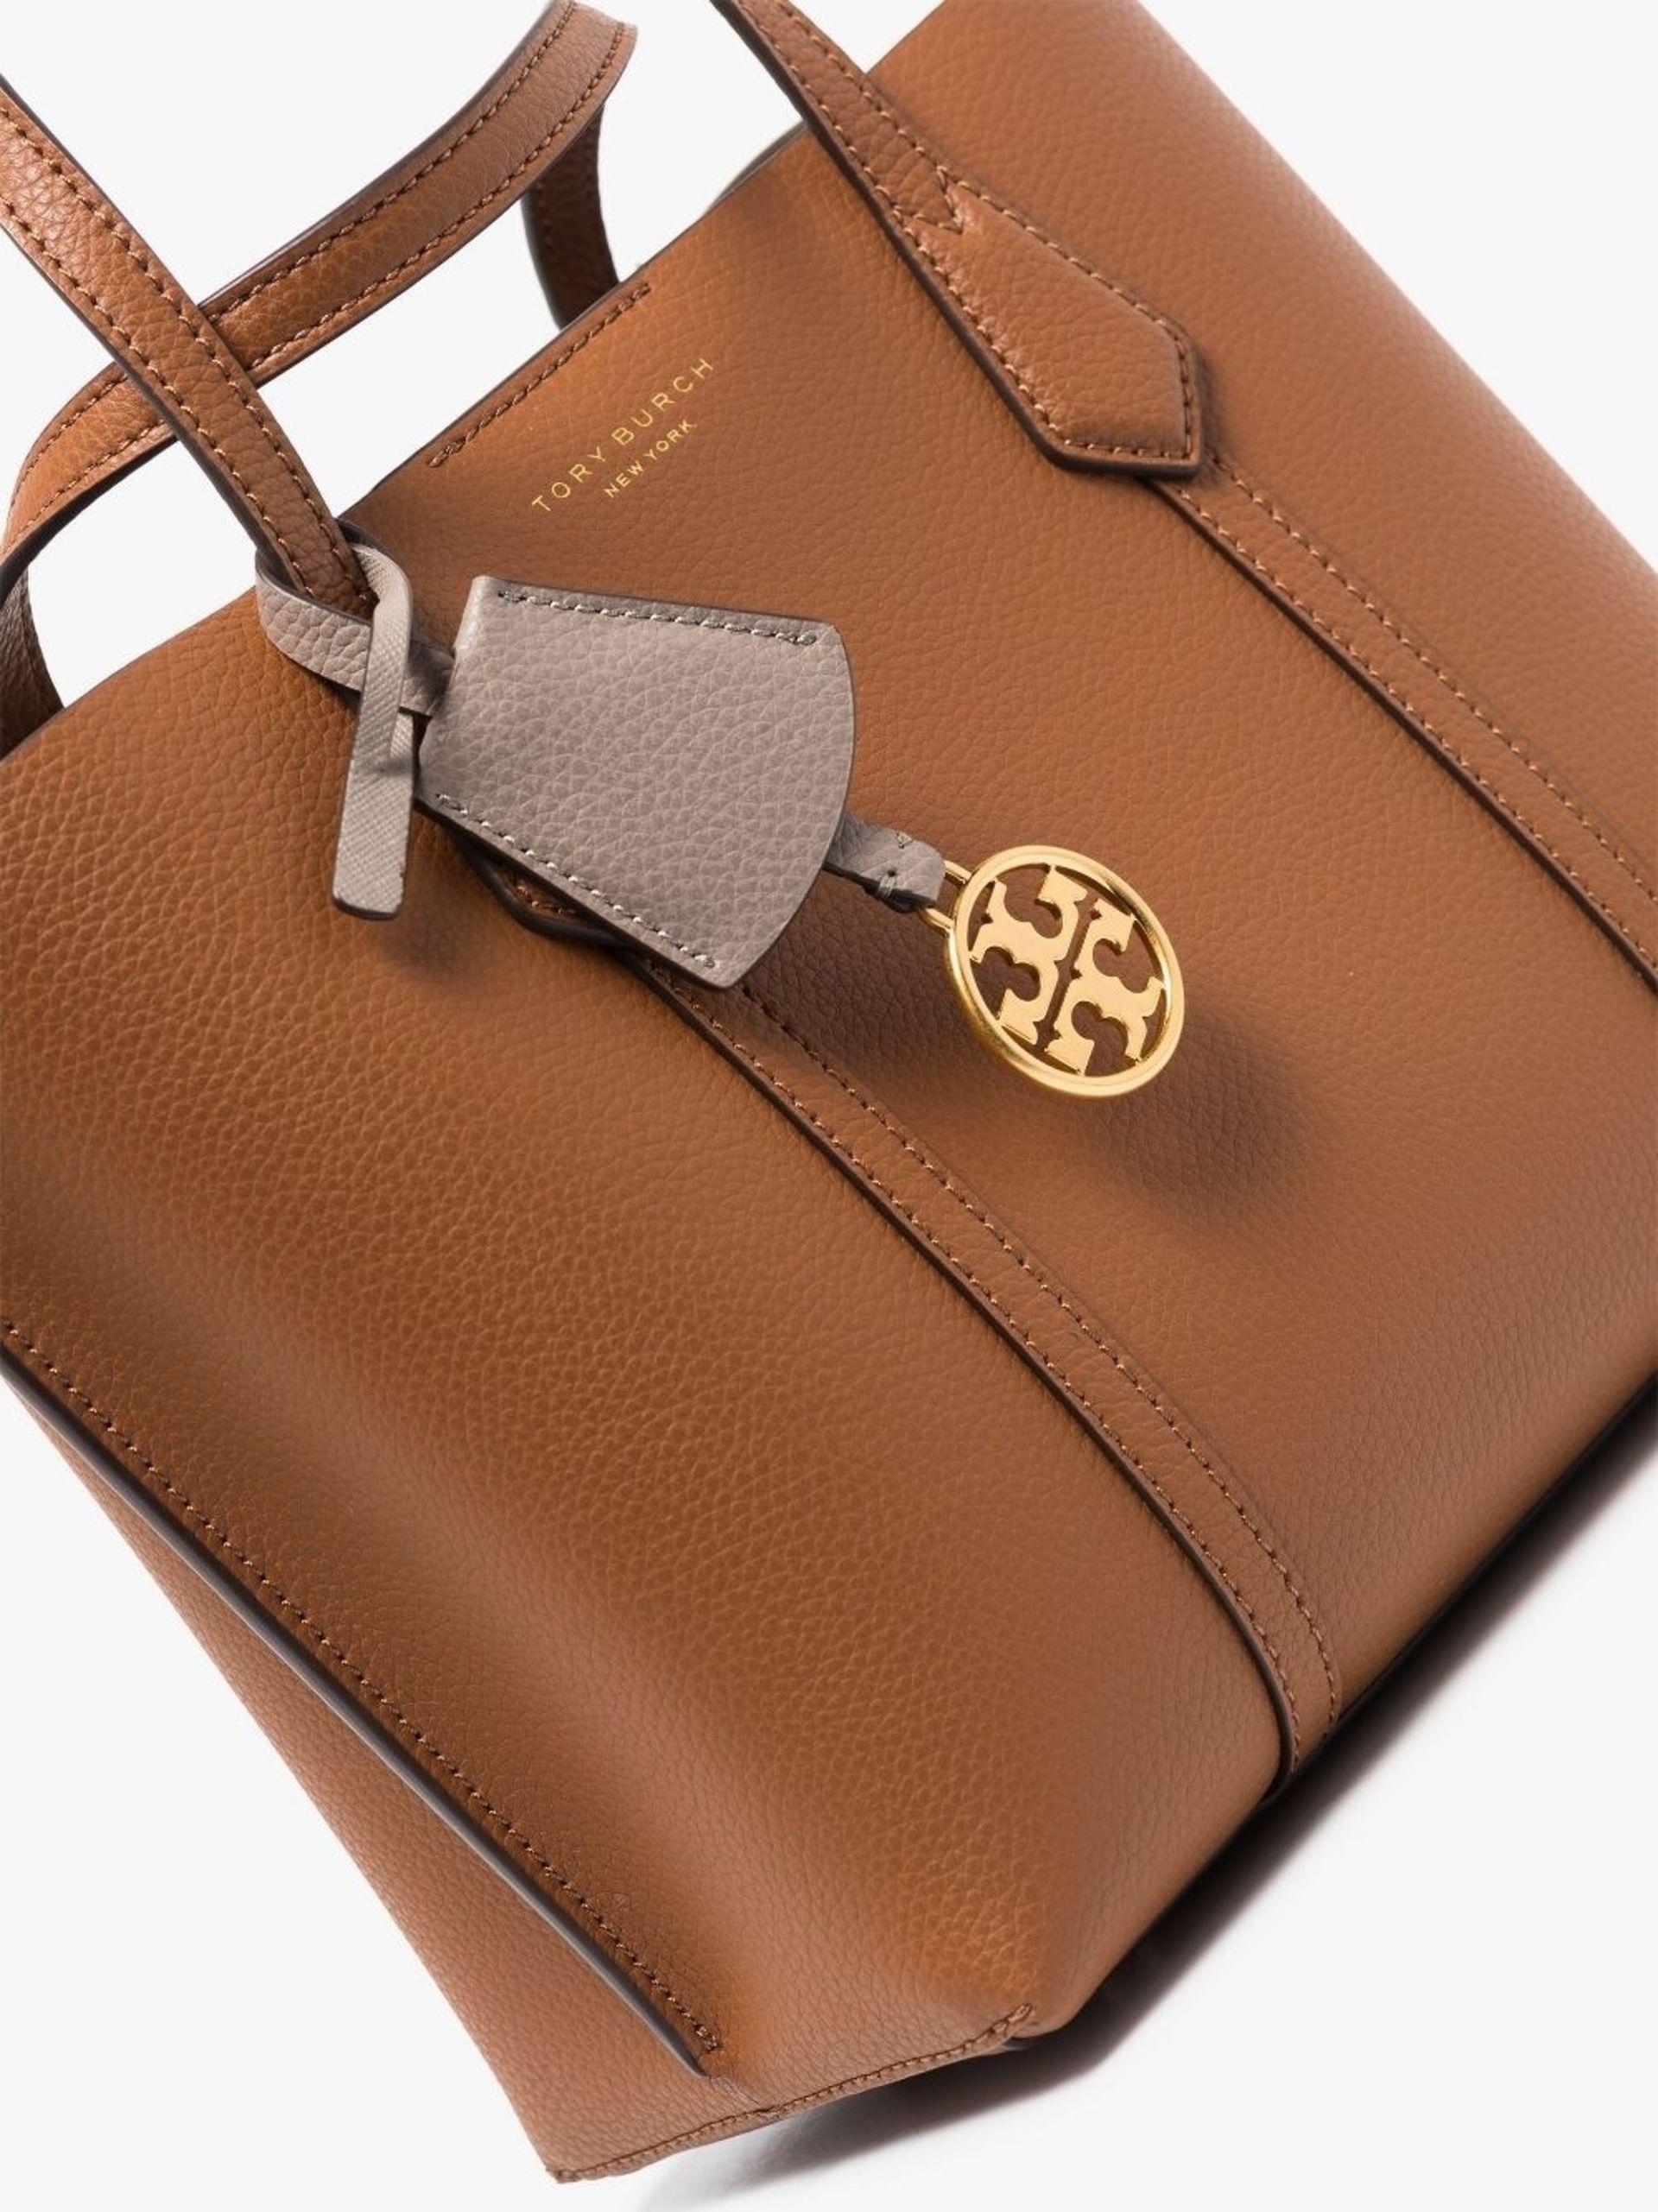 Tory Burch Small Perry Shopping Bag OS Brown Leather